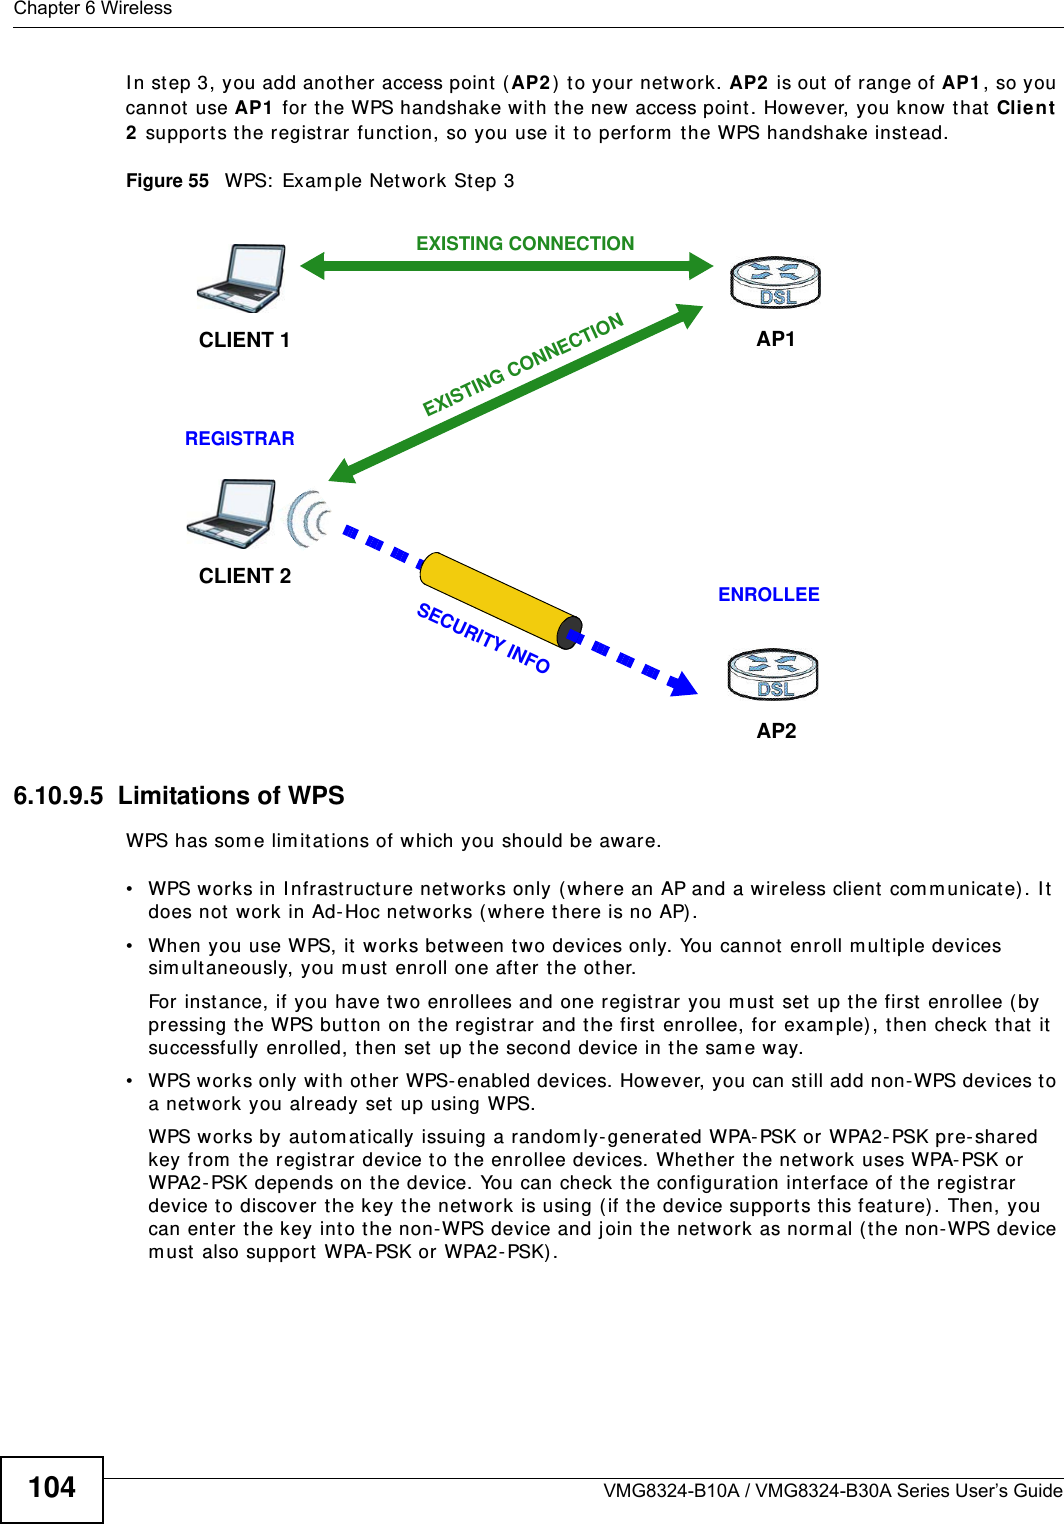 Chapter 6 WirelessVMG8324-B10A / VMG8324-B30A Series User’s Guide104I n st ep 3, you add anot her access point  ( AP2 )  t o your net w ork. AP2  is out  of range of AP1 , so you cannot  use AP1  for t he WPS handshake wit h t he new access point . However, you know t hat Client  2 supports the registrar funct ion, so you use it t o perform  the WPS handshake inst ead.Figure 55   WPS:  Exam ple Net work St ep 36.10.9.5  Limitations of WPSWPS has som e lim itations of w hich you should be aware. • WPS works in I nfrastructure net works only ( where an AP and a w ireless client  com m unicate) . I t  does not  work in Ad- Hoc net w orks ( wher e there is no AP) .• When you use WPS, it works bet ween two devices only. You cannot  enr oll m ult iple devices sim ult aneously, you m ust  enroll one aft er t he ot her. For  instance, if you have t wo enrollees and one regist rar you m ust set  up t he first  enrollee ( by pressing the WPS butt on on t he regist rar and t he first  enrollee, for exam ple) , t hen check that it successfully enrolled, t hen set  up t he second device in t he sam e way.• WPS works only with ot her WPS- enabled devices. However, you can still add non-WPS devices t o a network you already set  up using WPS. WPS works by autom at ically issuing a random ly- generat ed WPA- PSK or WPA2- PSK pre- shared key from  t he registrar device to t he enrollee devices. Whet her t he network uses WPA-PSK or WPA2- PSK depends on the device. You can check the configurat ion interface of t he regist rar device t o discover t he key t he net work is using ( if the device supports t his feat ure) . Then, you can ent er t he key int o t he non-WPS device and j oin t he net work as nor m al ( t he non-WPS device m ust also support  WPA- PSK or WPA2- PSK) .CLIENT 1 AP1REGISTRARCLIENT 2EXISTING CONNECTIONSECURITY INFOENROLLEEAP2EXISTING CONNECTION